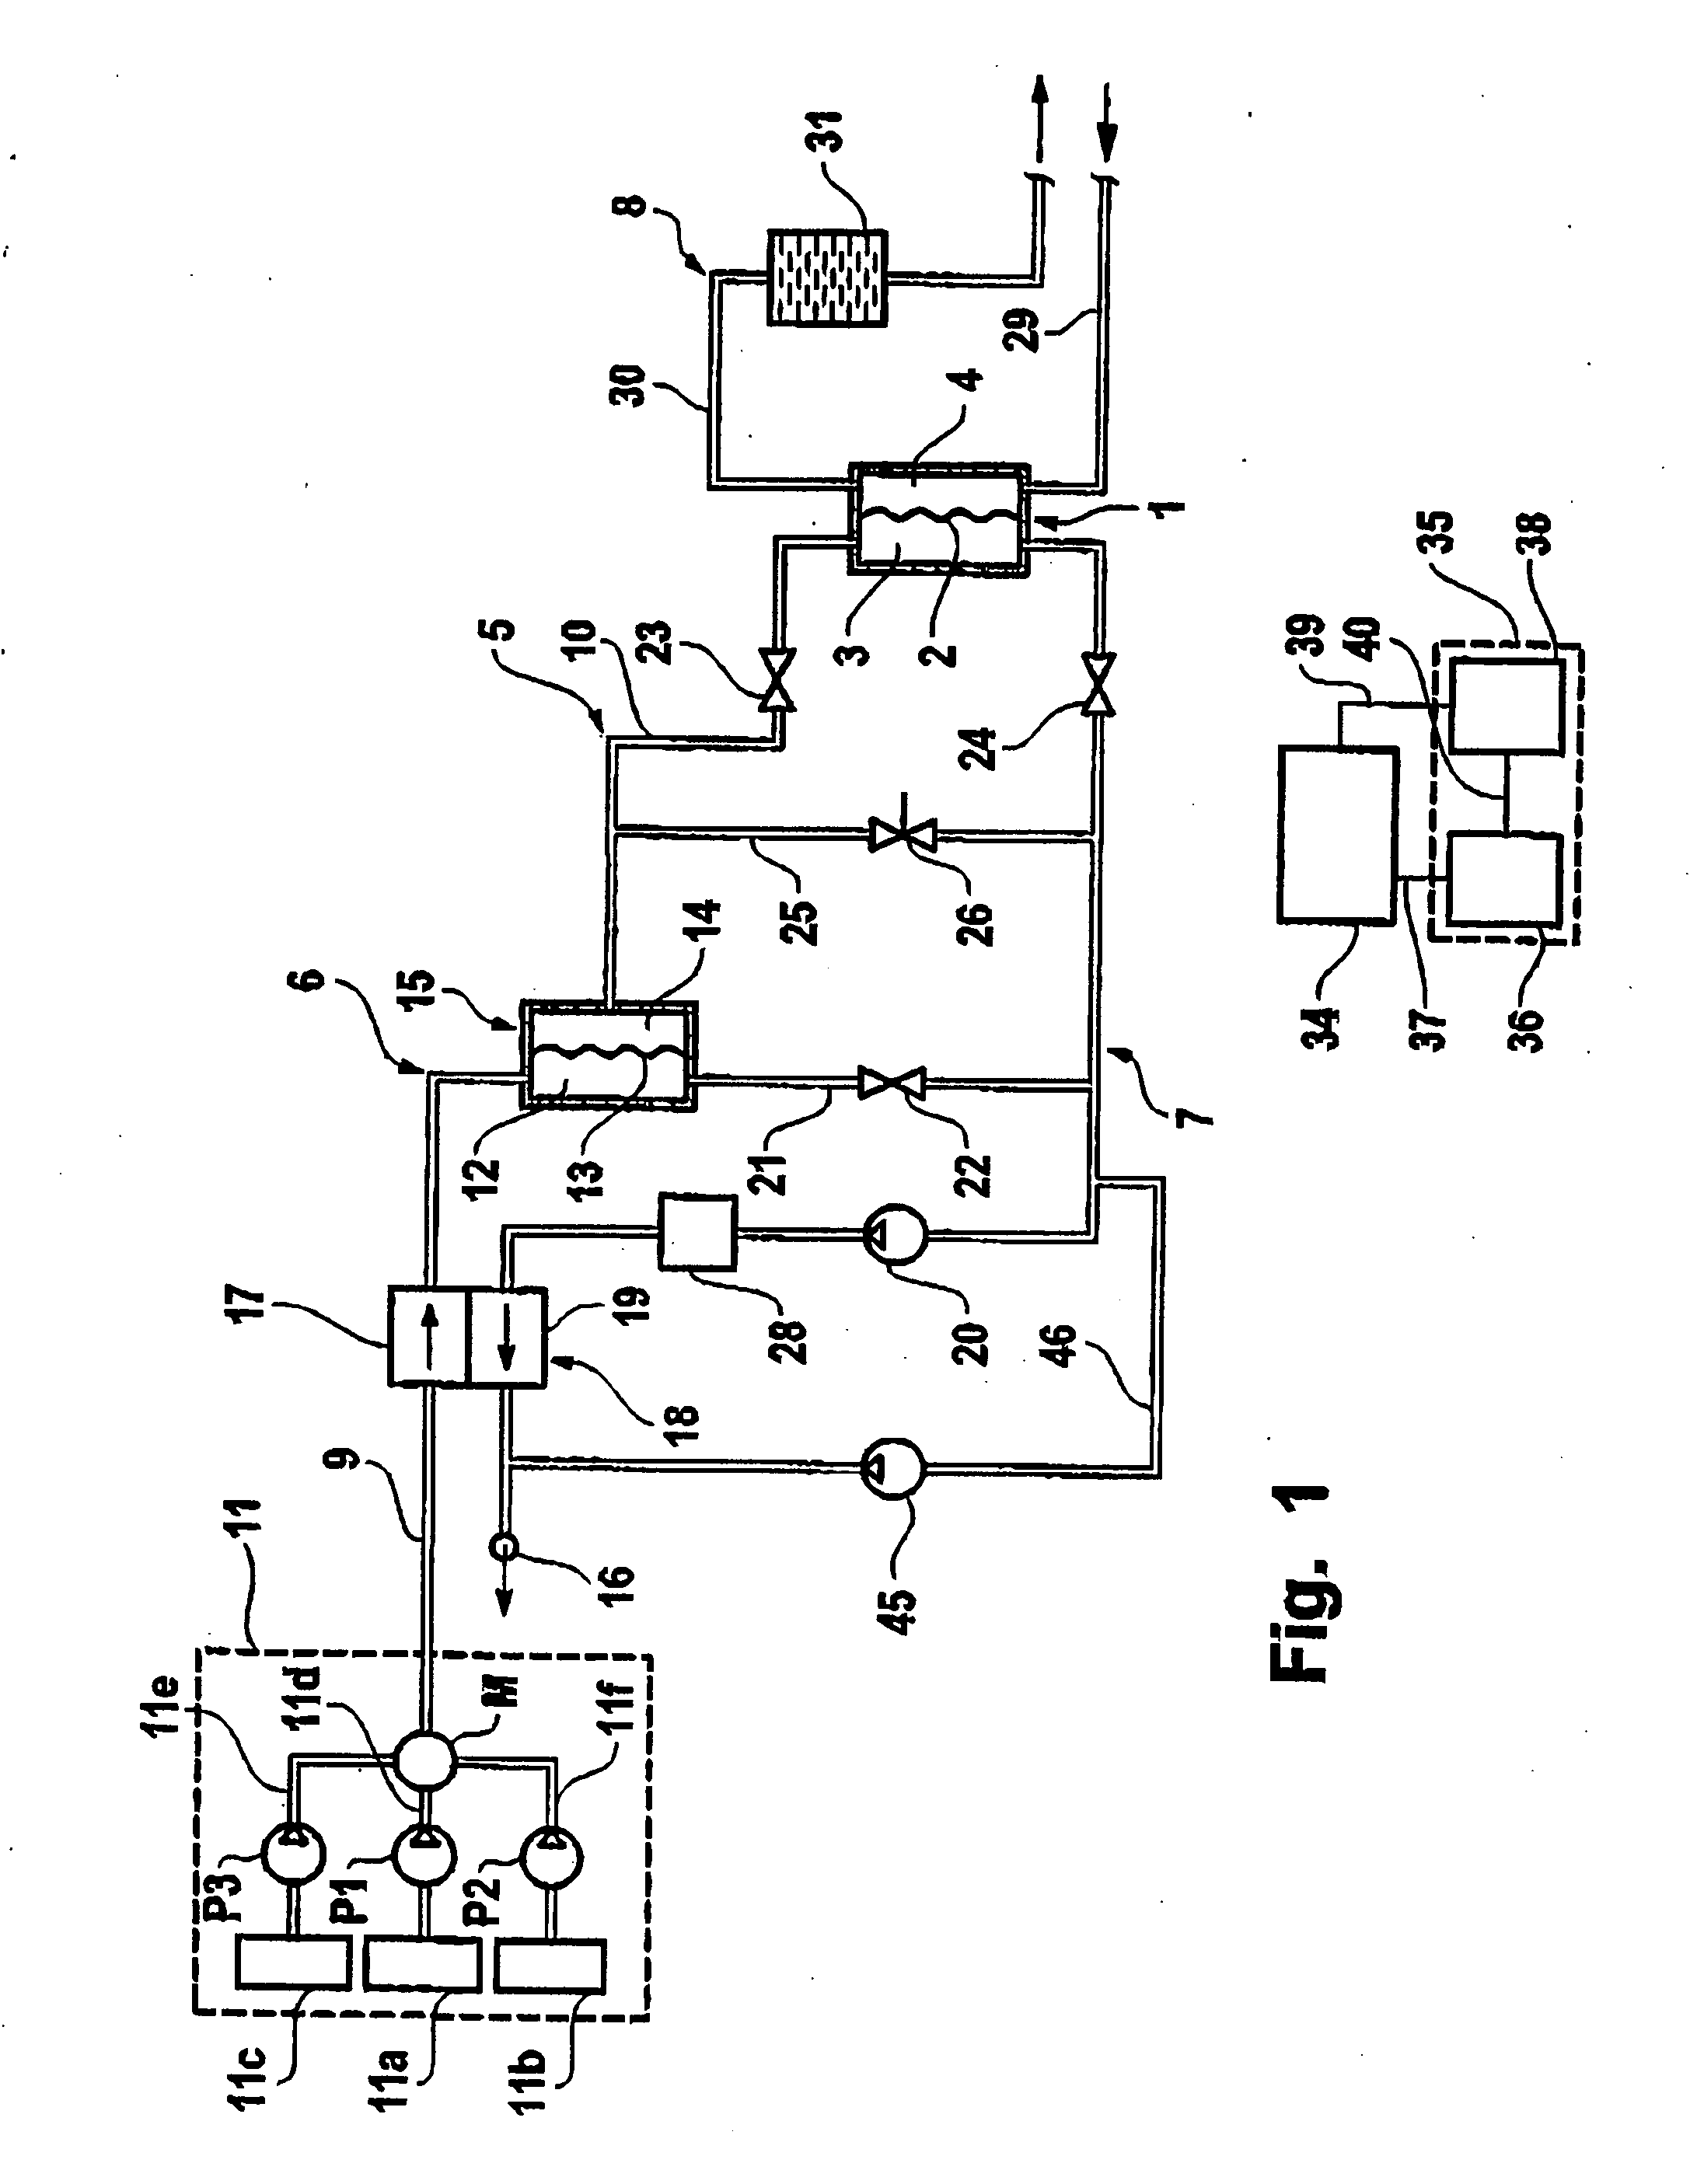 Apparatus for extracorporeal blood treatment with a device for checking a sterile filter, and method of checking a sterile filter of an extracorporeal blood treatment apparatus